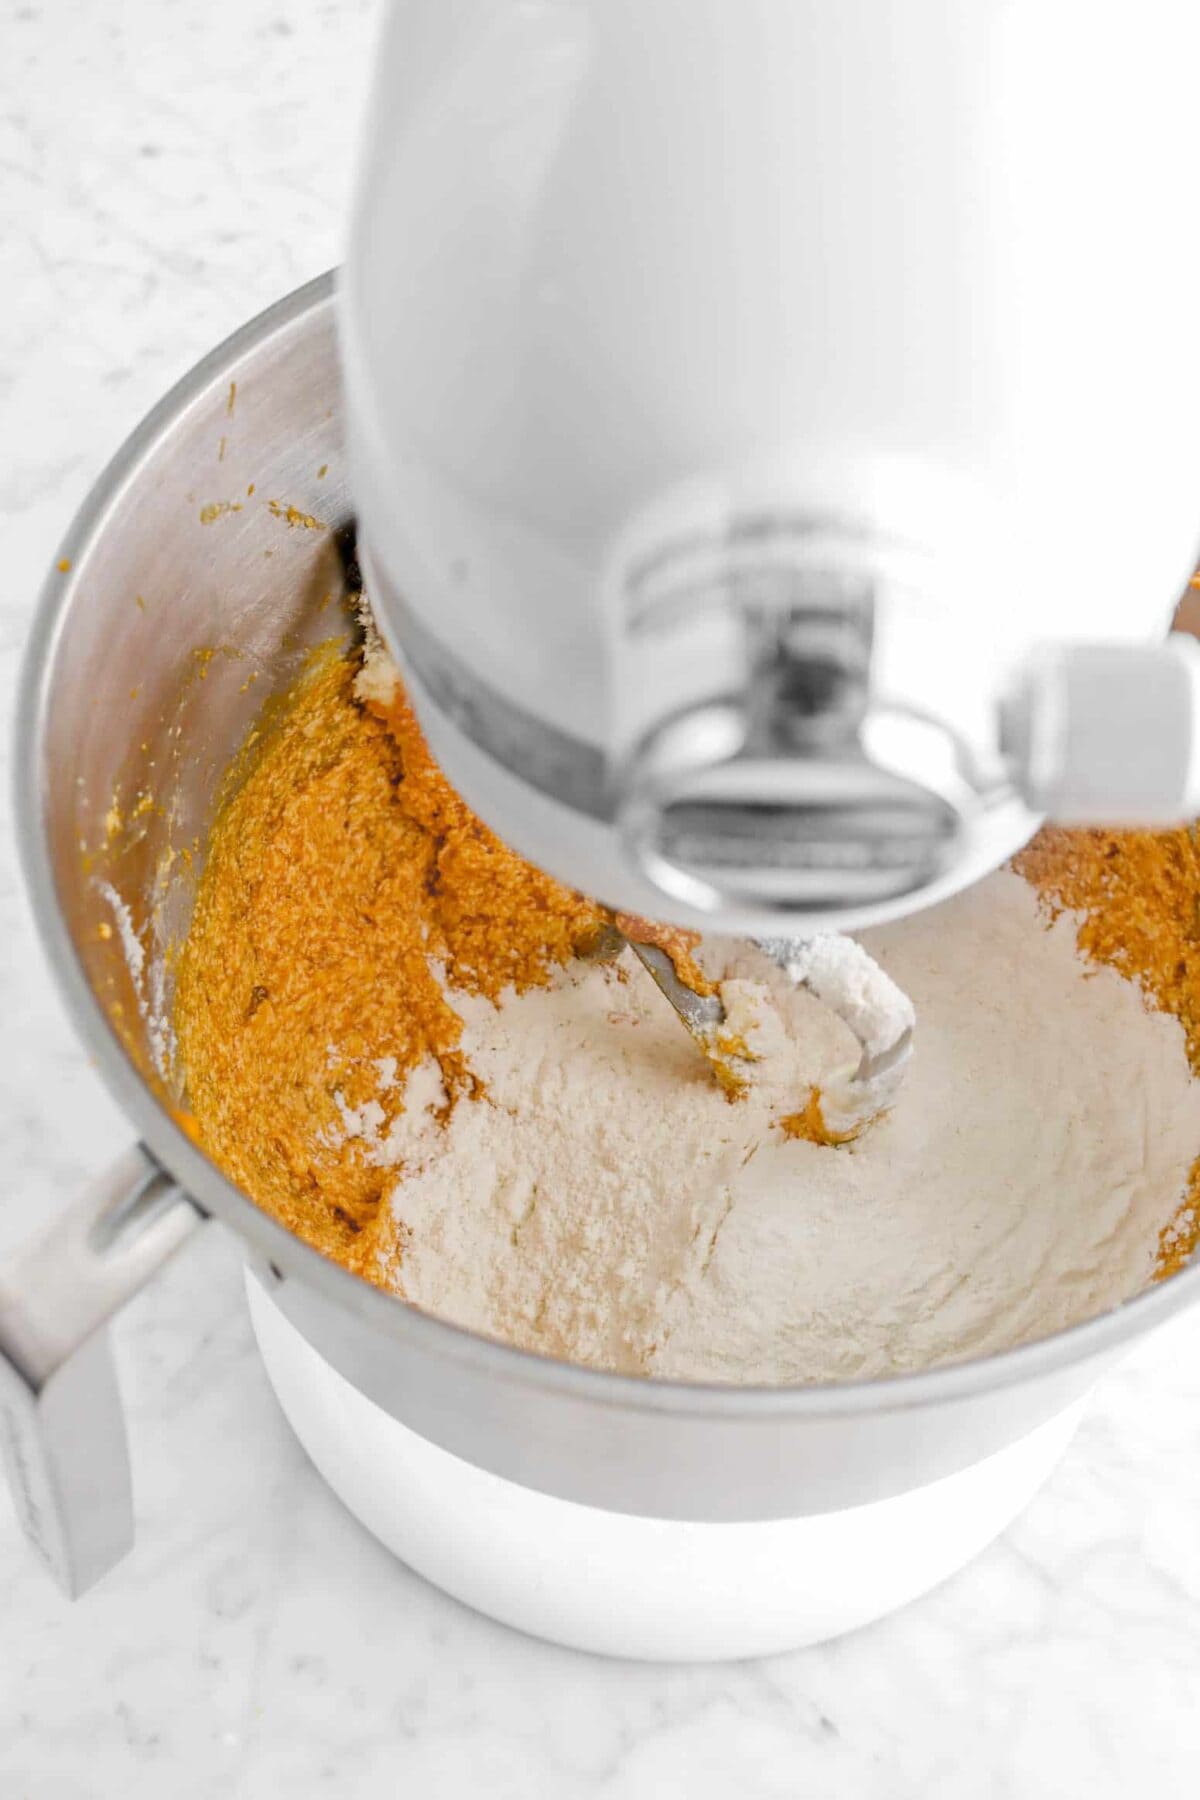 dry ingredients added to pumpkin and butter mixture